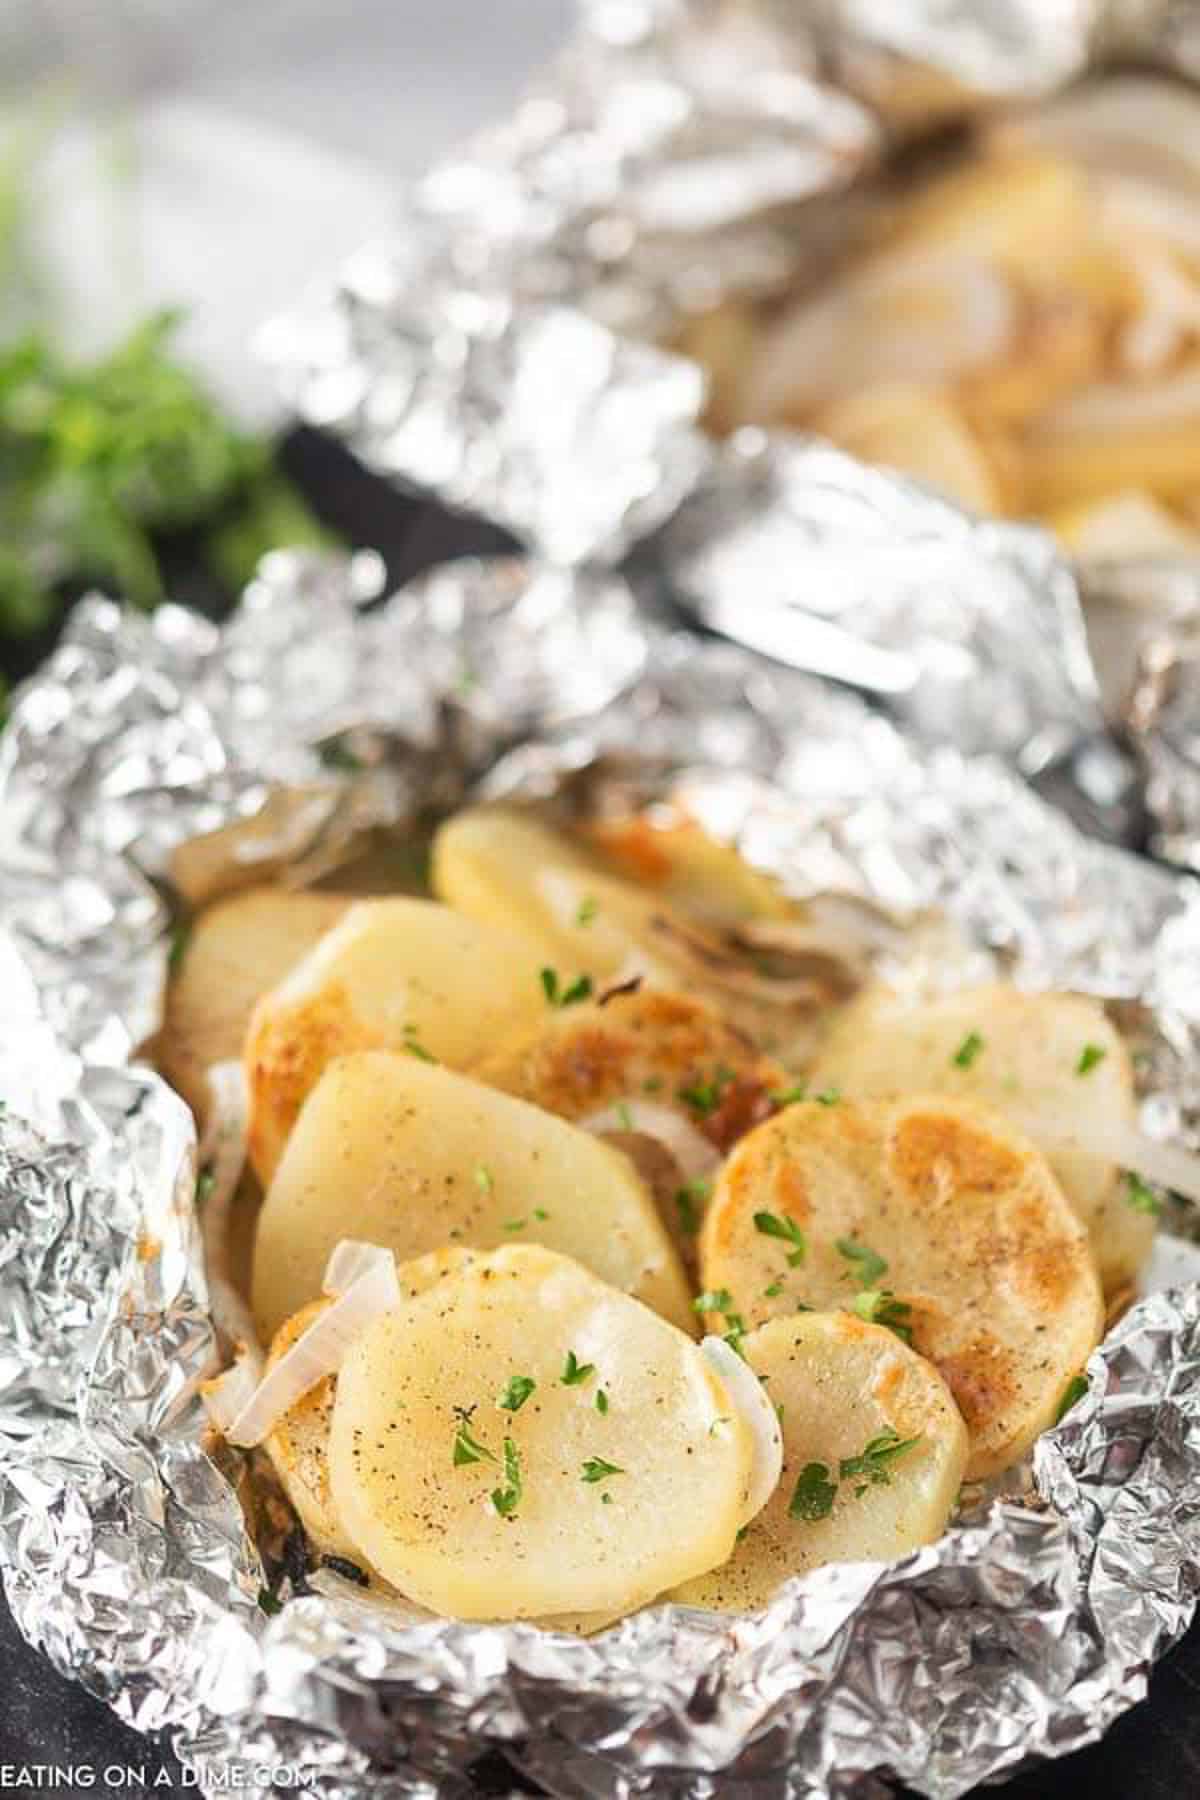 Grilled potatoes in foil